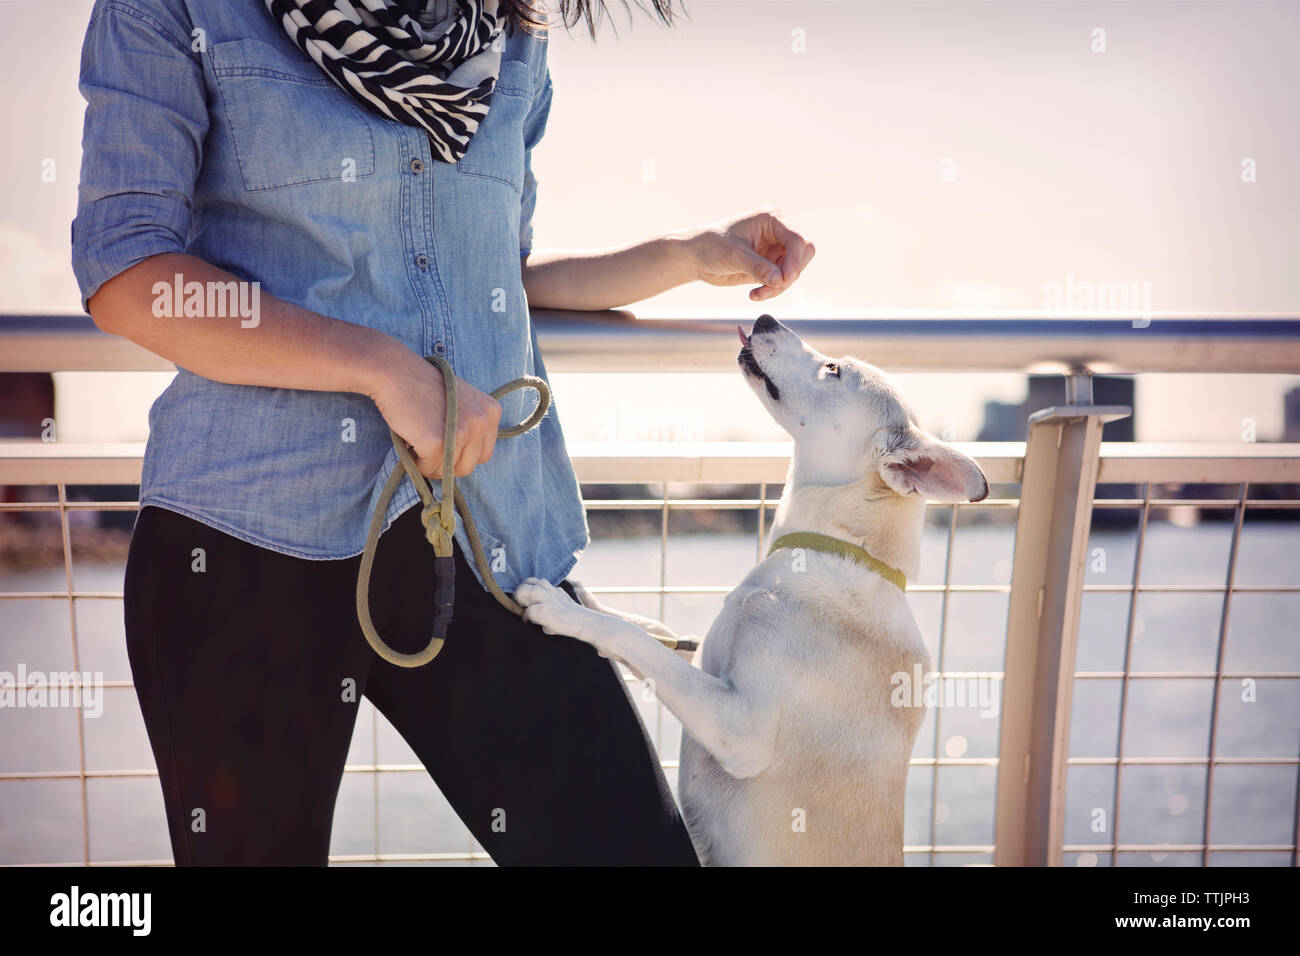 Dog rearing up on woman standing by railing against river Stock Photo